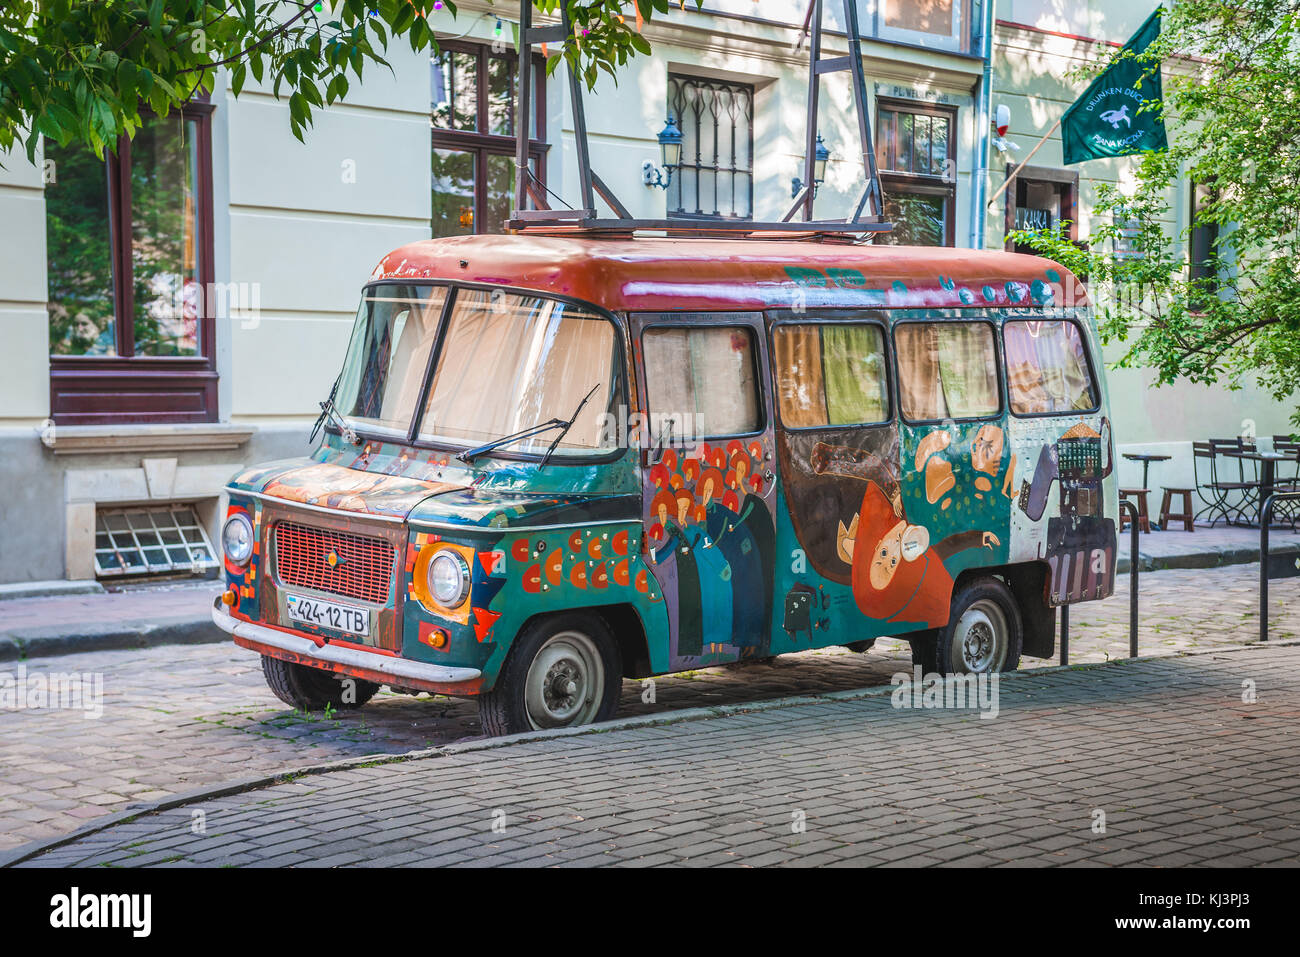 Painted Nysa van on the Old Town of Lviv city, largest city in western Ukraine Stock Photo